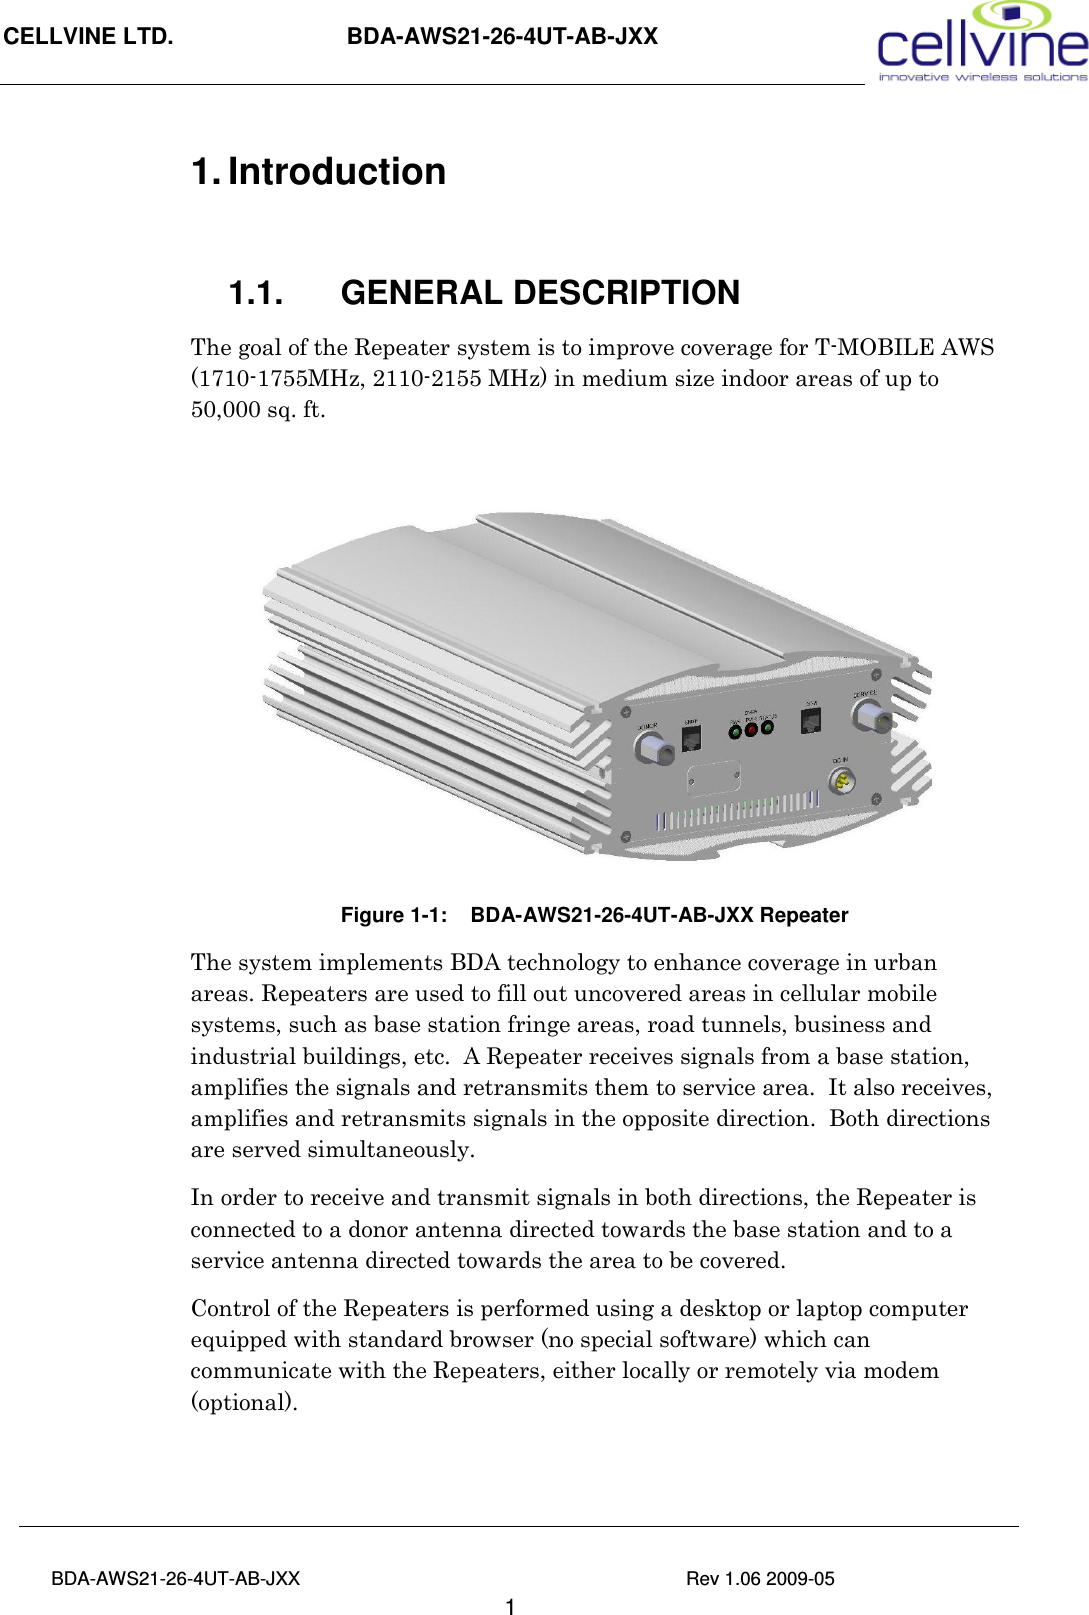 CELLVINE LTD.                      BDA-AWS21-26-4UT-AB-JXX                                                 BDA-AWS21-26-4UT-AB-JXX                                                                          Rev 1.06 2009-05                                       1 1. Introduction   1.1.  GENERAL DESCRIPTION The goal of the Repeater system is to improve coverage for T-MOBILE AWS (1710-1755MHz, 2110-2155 MHz) in medium size indoor areas of up to 50,000 sq. ft.    Figure  1-1:    BDA-AWS21-26-4UT-AB-JXX Repeater The system implements BDA technology to enhance coverage in urban areas. Repeaters are used to fill out uncovered areas in cellular mobile systems, such as base station fringe areas, road tunnels, business and industrial buildings, etc.  A Repeater receives signals from a base station, amplifies the signals and retransmits them to service area.  It also receives, amplifies and retransmits signals in the opposite direction.  Both directions are served simultaneously.  In order to receive and transmit signals in both directions, the Repeater is connected to a donor antenna directed towards the base station and to a service antenna directed towards the area to be covered. Control of the Repeaters is performed using a desktop or laptop computer equipped with standard browser (no special software) which can communicate with the Repeaters, either locally or remotely via modem (optional).  